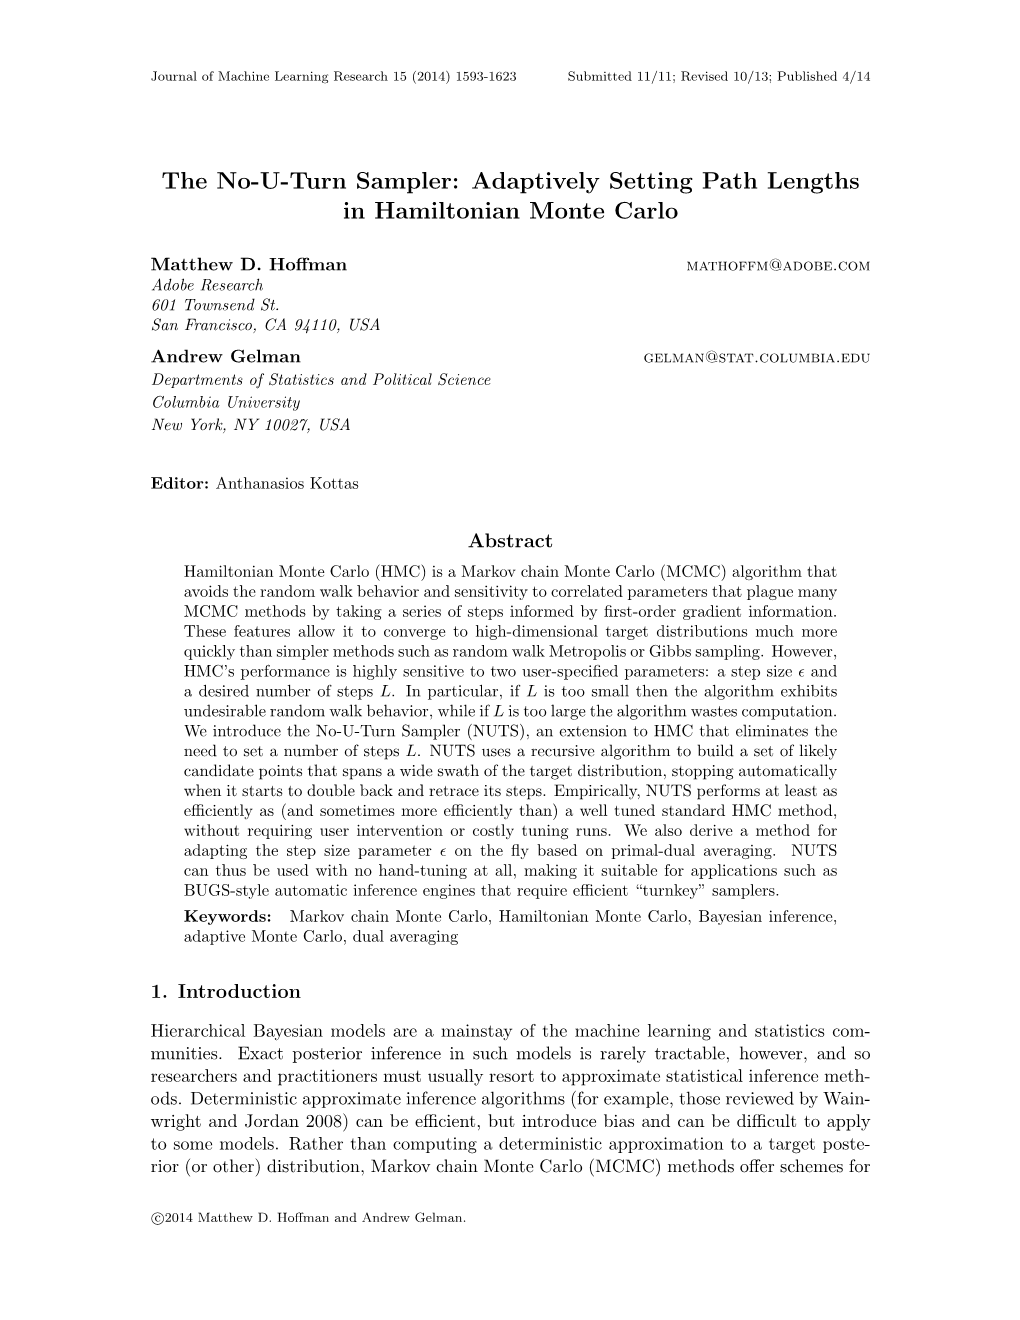 The No-U-Turn Sampler: Adaptively Setting Path Lengths in Hamiltonian Monte Carlo